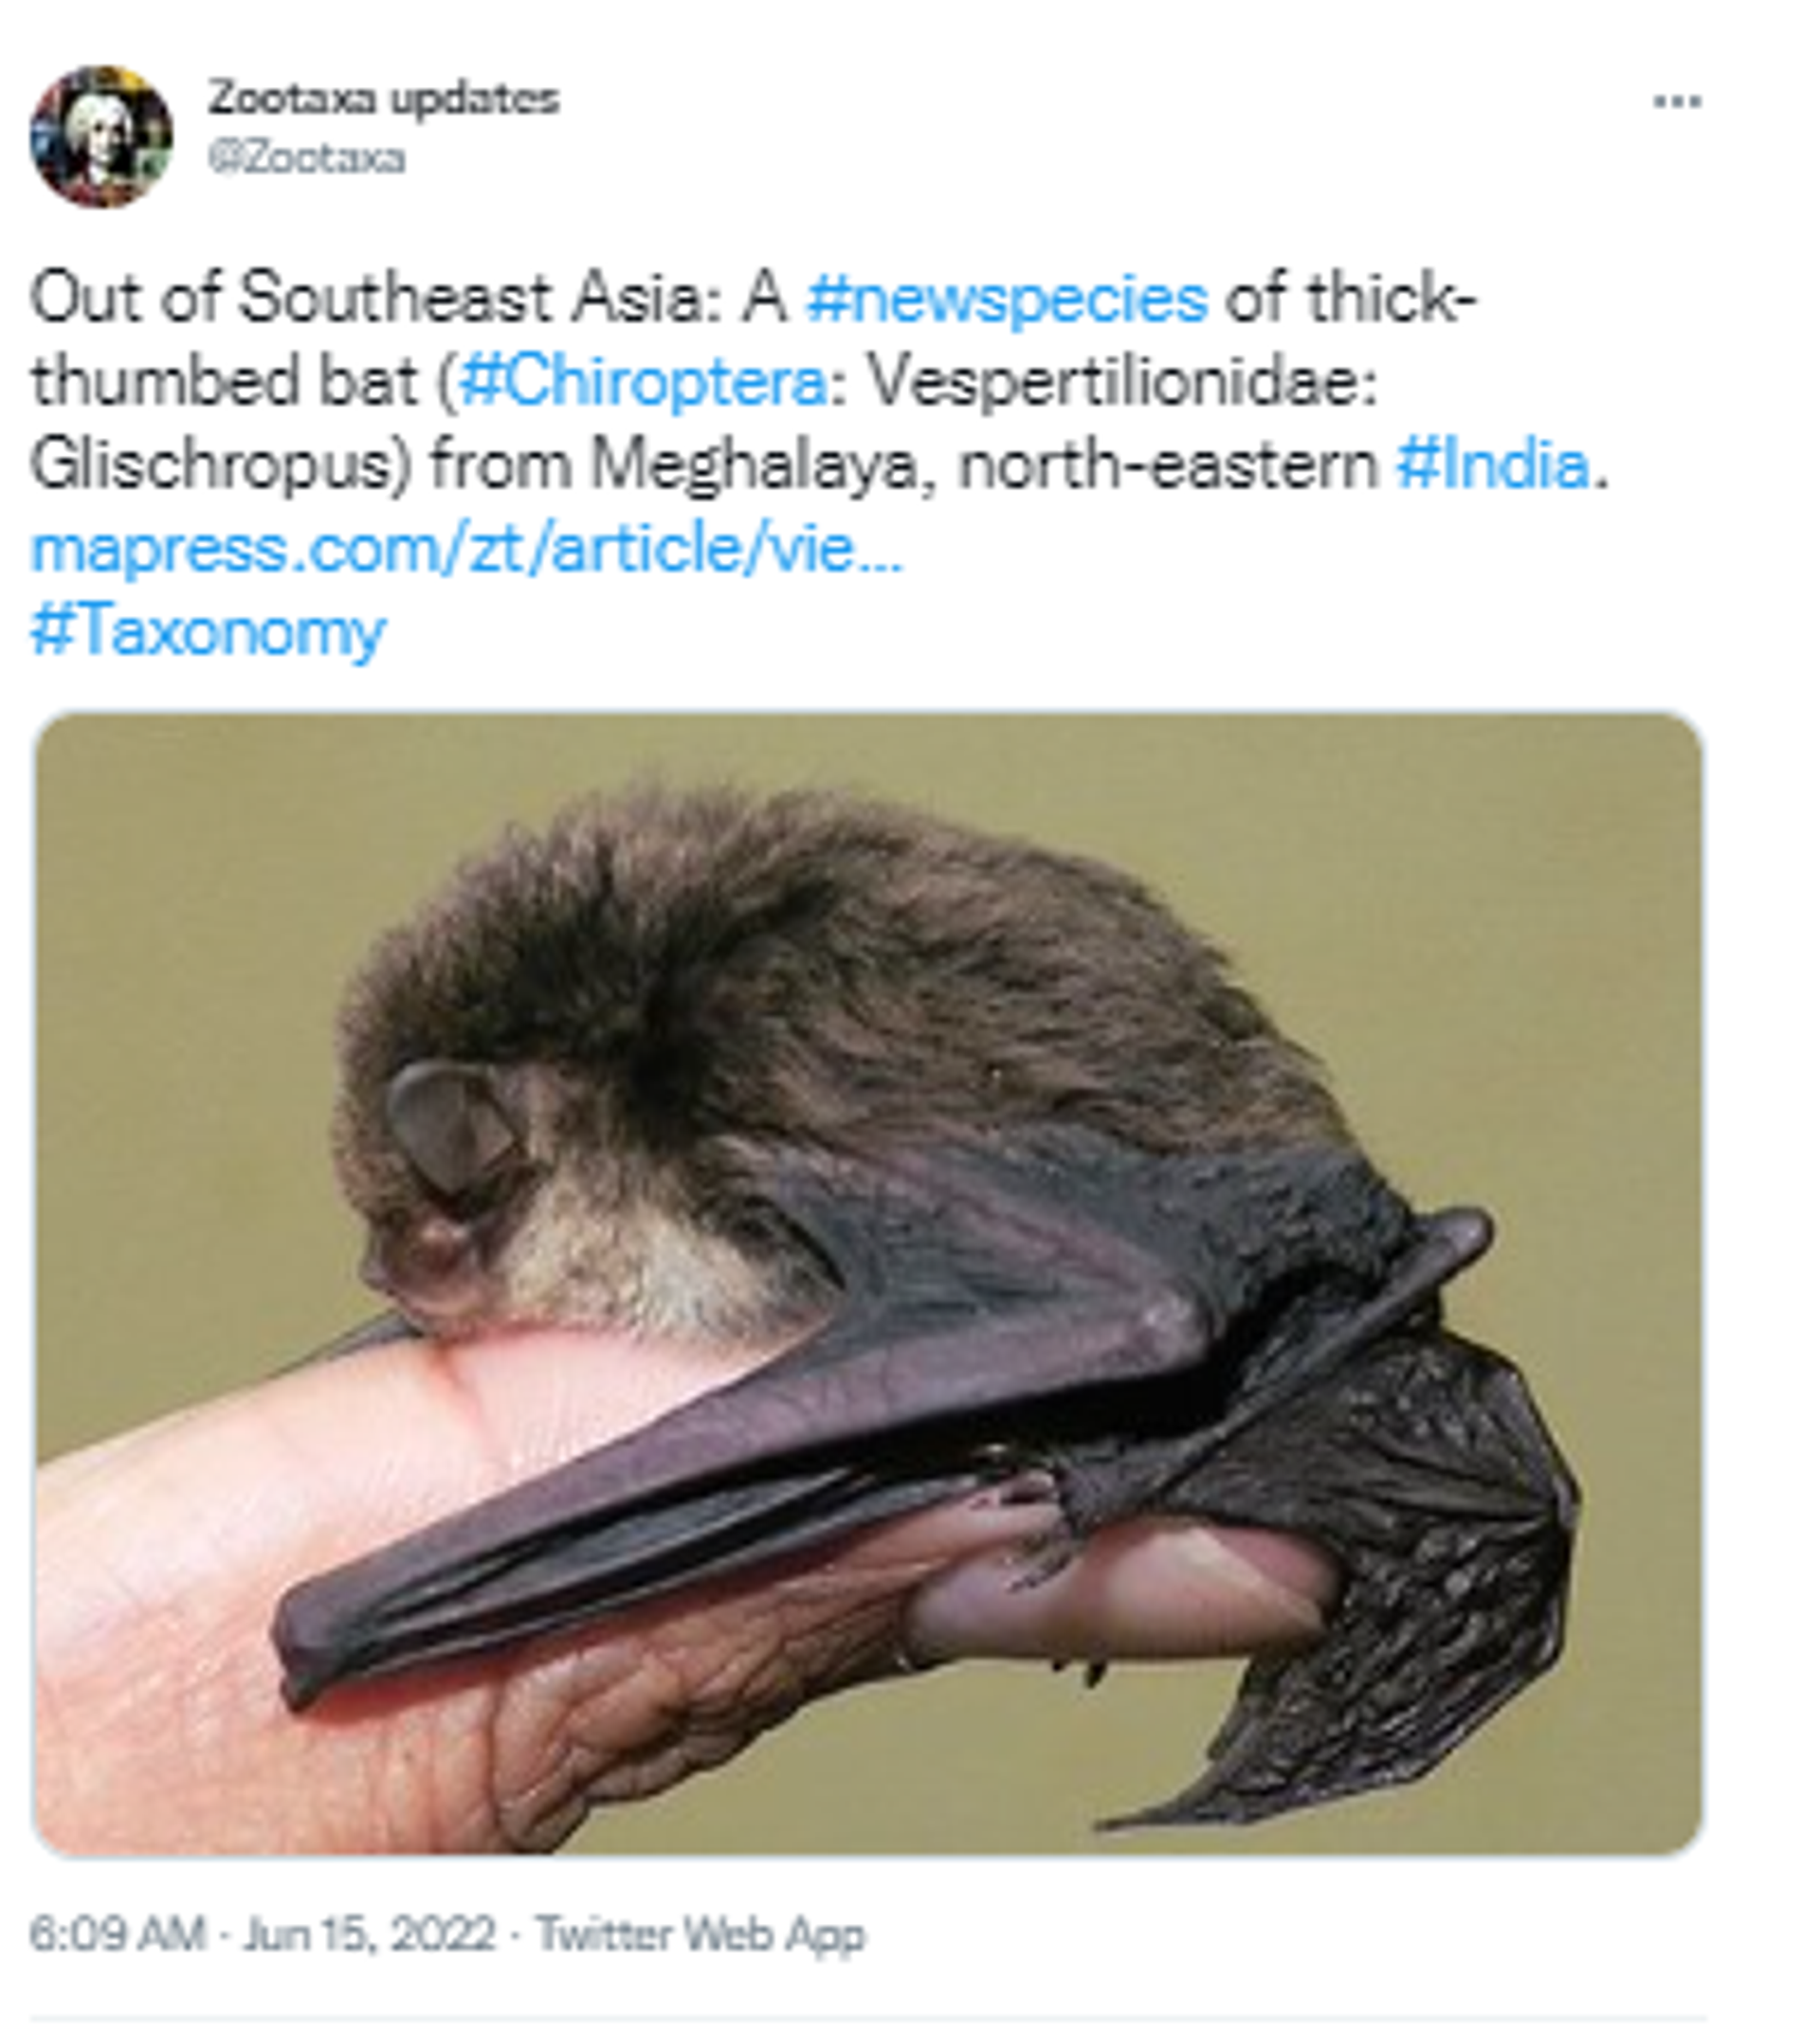 Scientists discover new thick-thumbed bat species, name it after India's Meghalaya state - Sputnik International, 1920, 15.06.2022